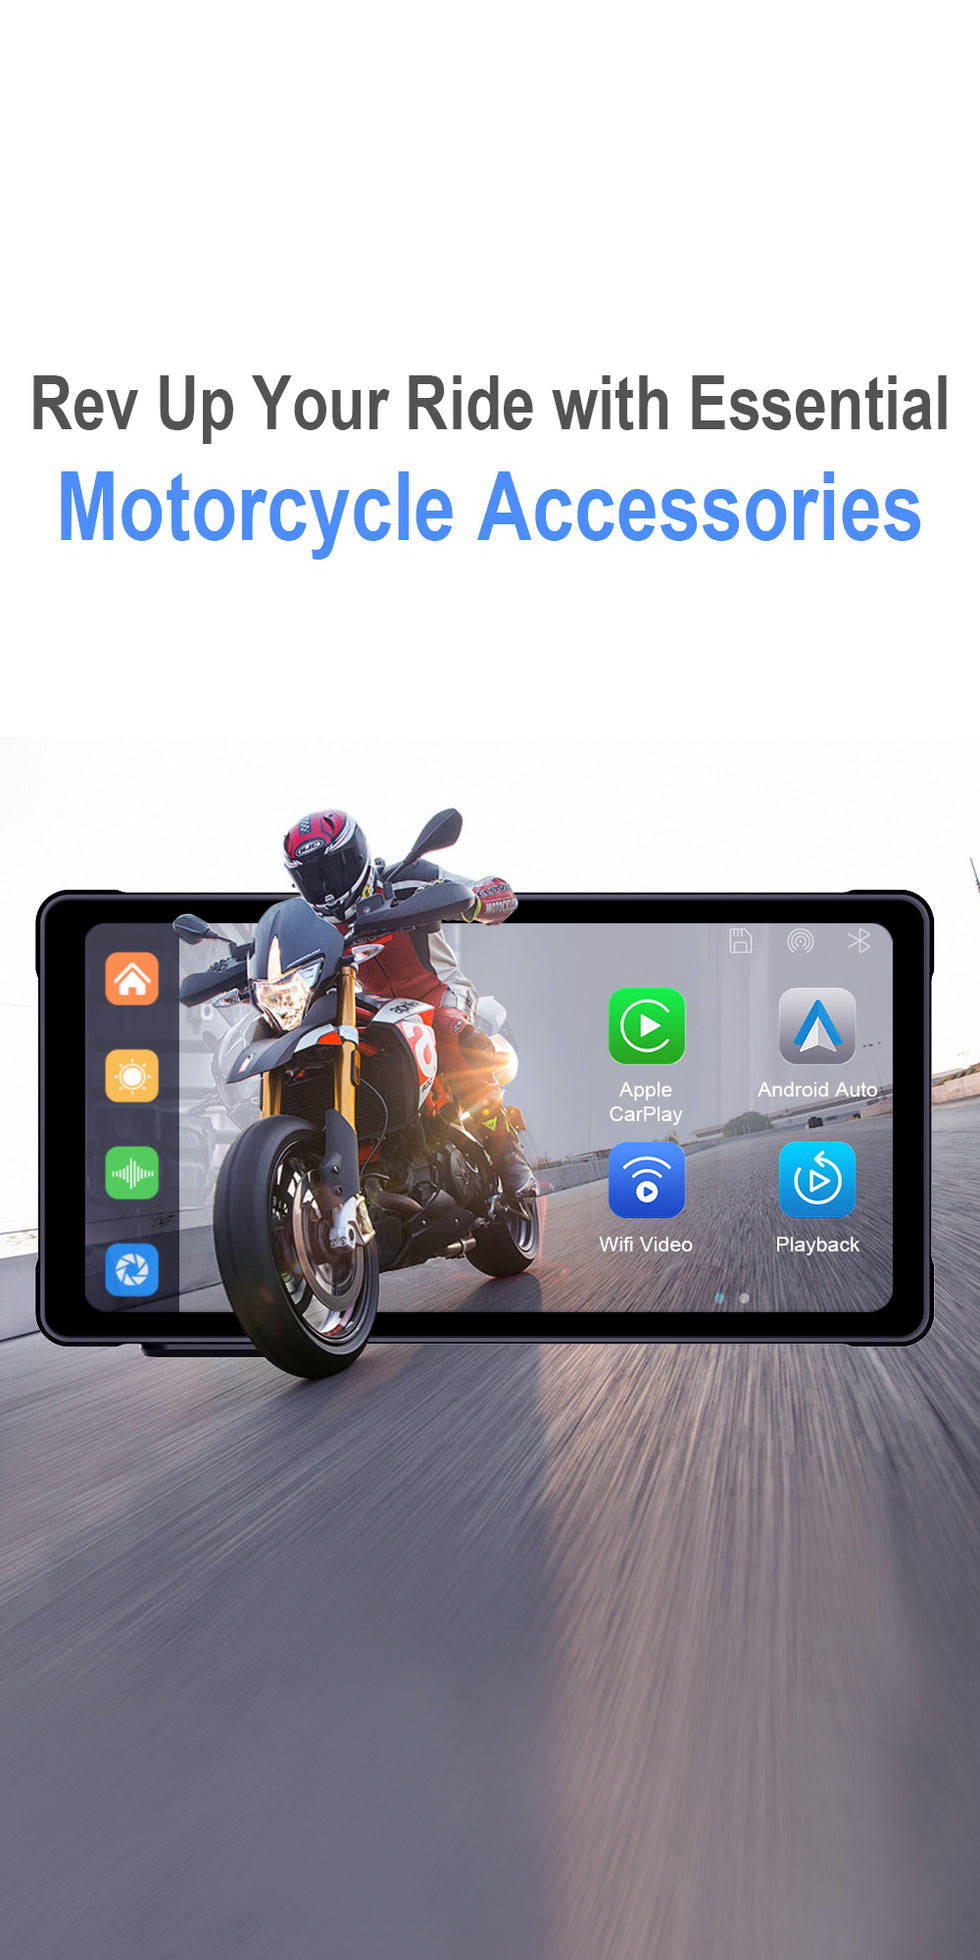 Linkifun-Wireless-Carplay-Android-Auto-Adapter-Easter-Motorcycle-Accessories-Banner-Mobile-2